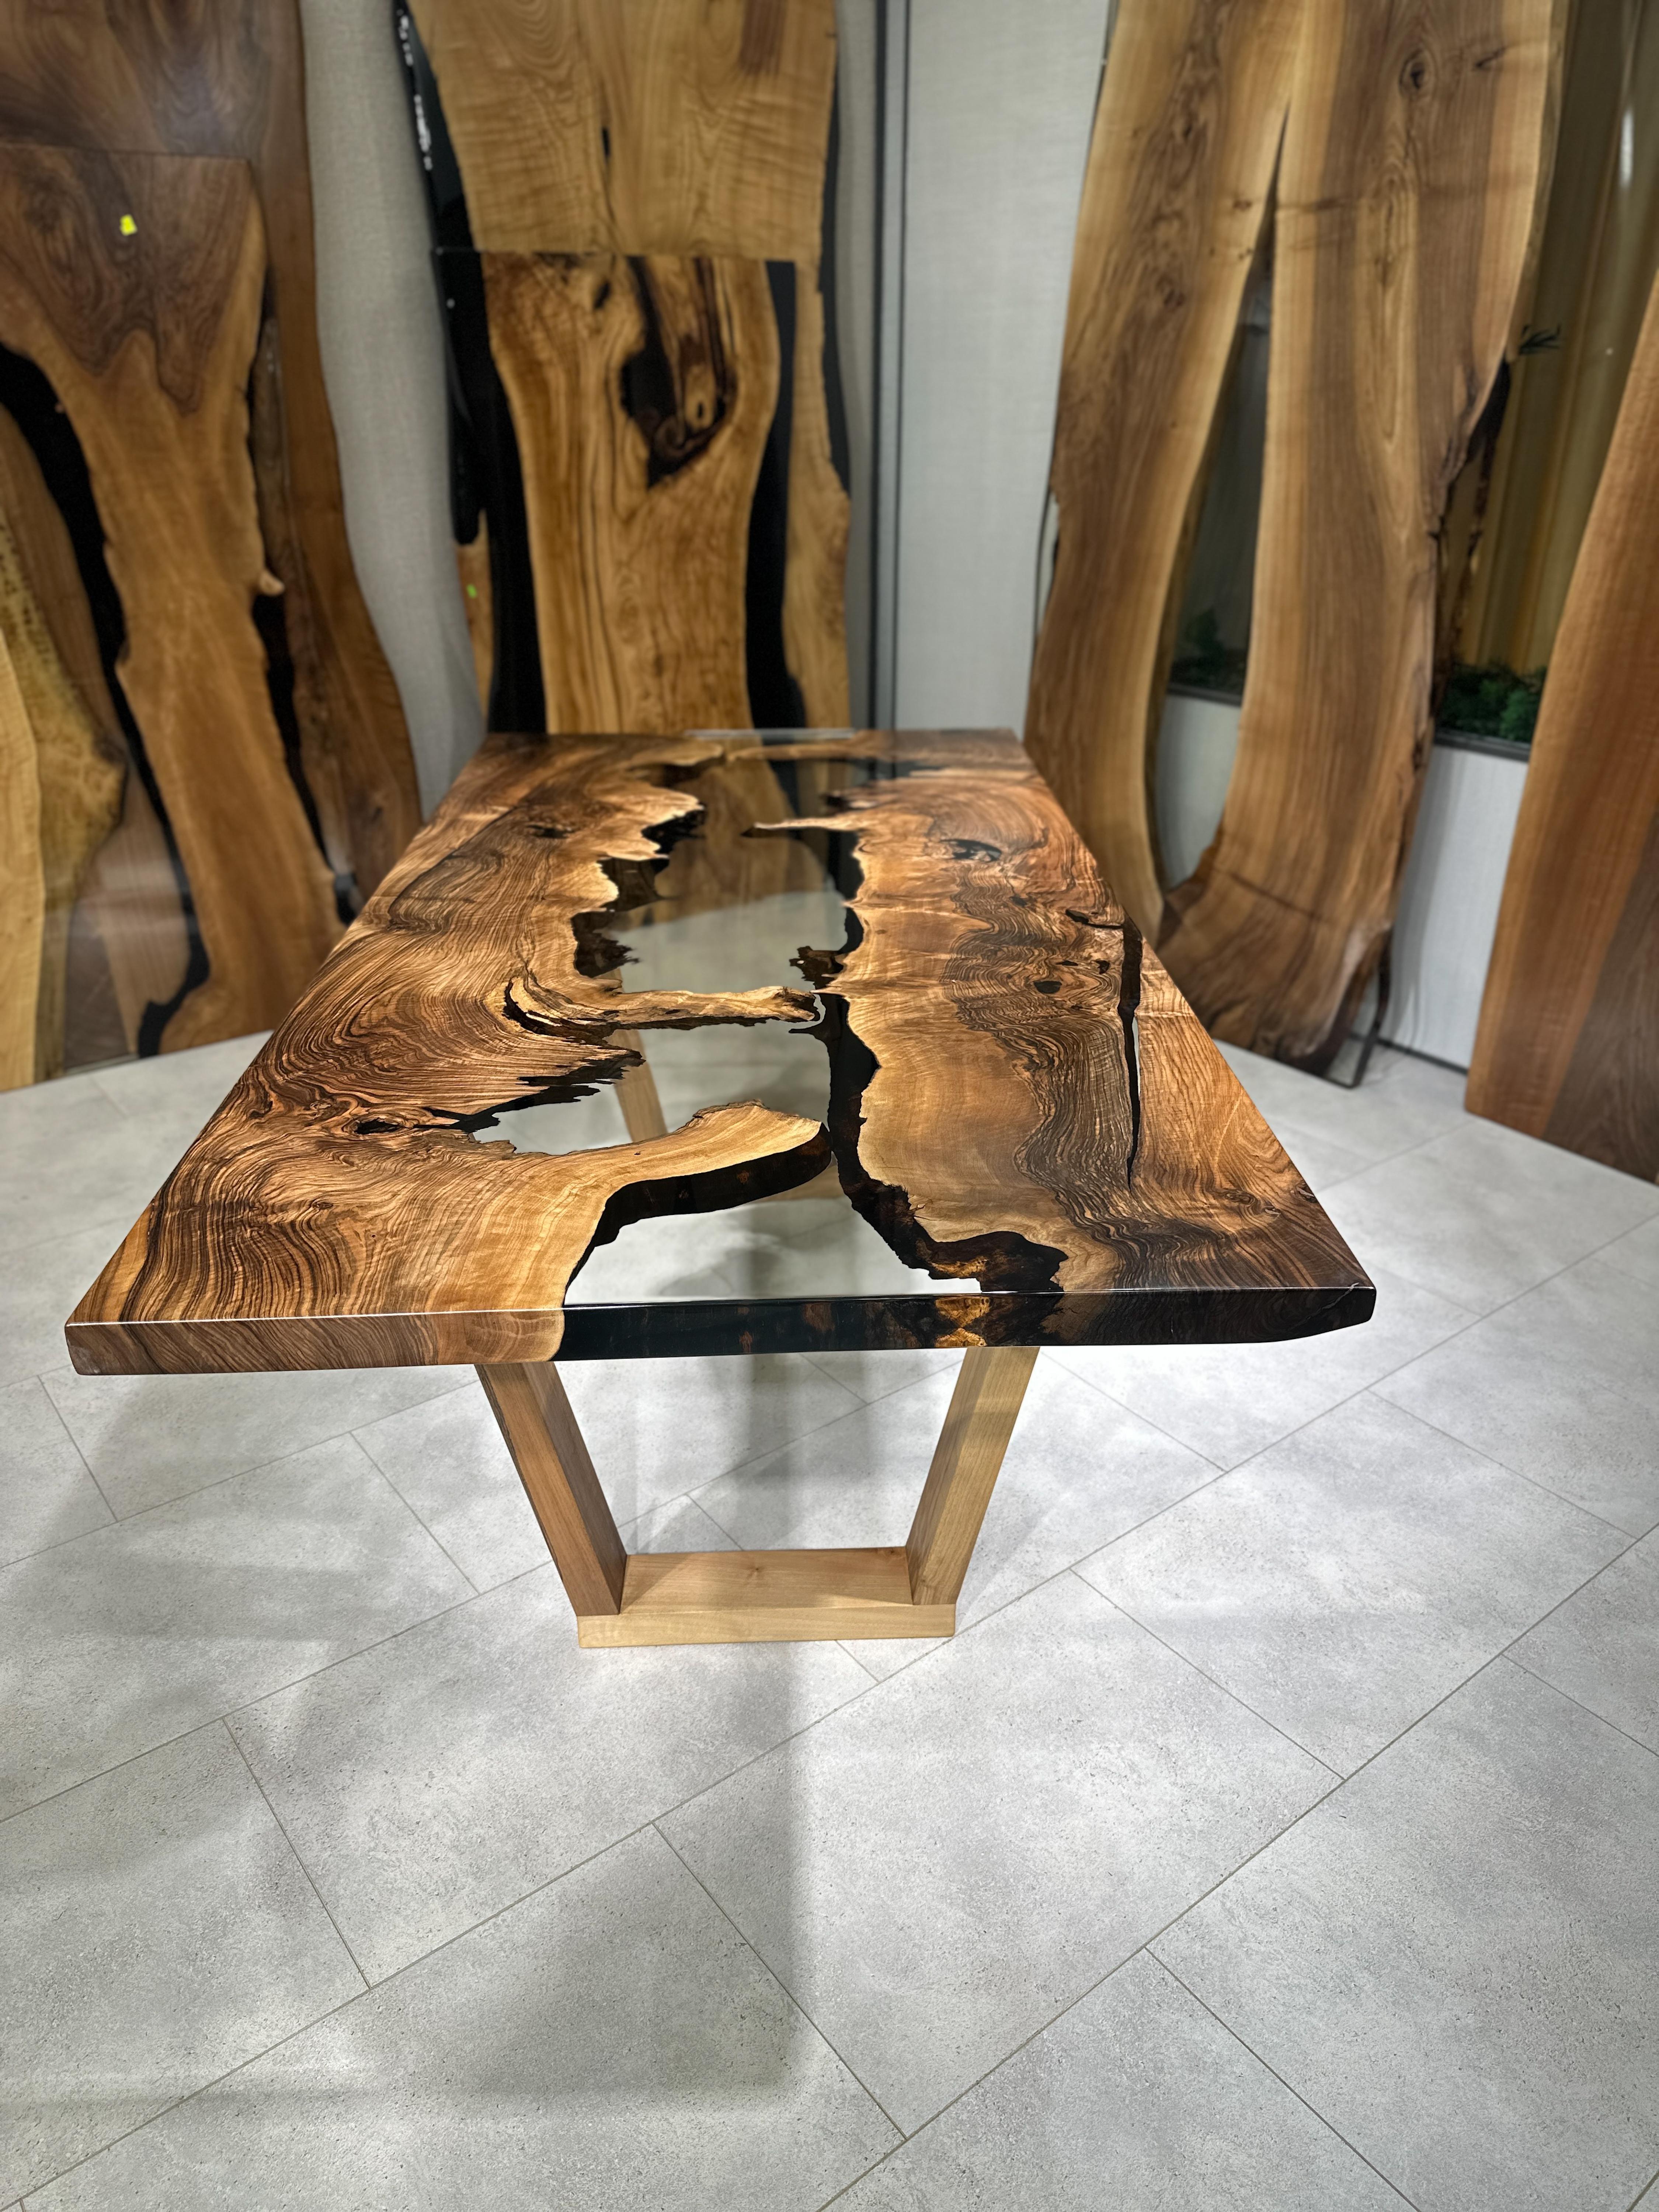 Walnut Live Edge Clear Epoxy Resin Dining Table 

This table is made of 500 years old Walnut Wood. The grains and texture of the wood describe what a natural walnut woods looks like.
It can be used as a dining table or as a conference table.